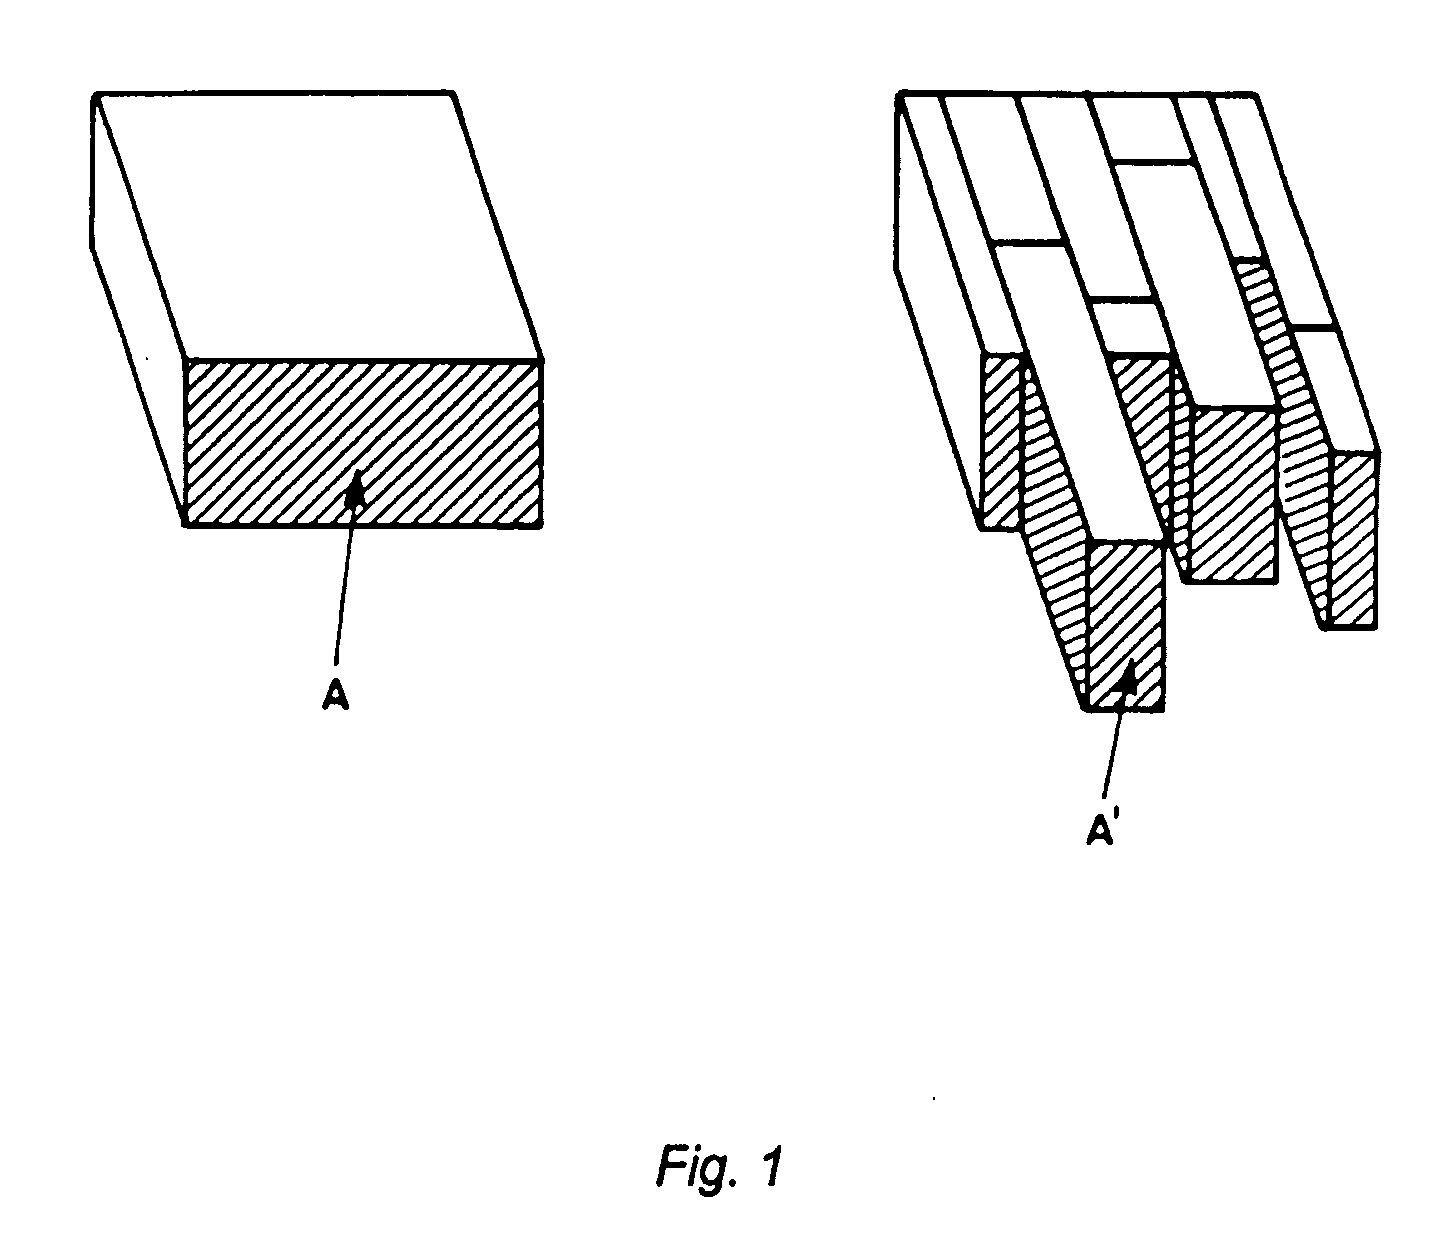 Superconductor with optimized microstructure and method for making such a superconductor